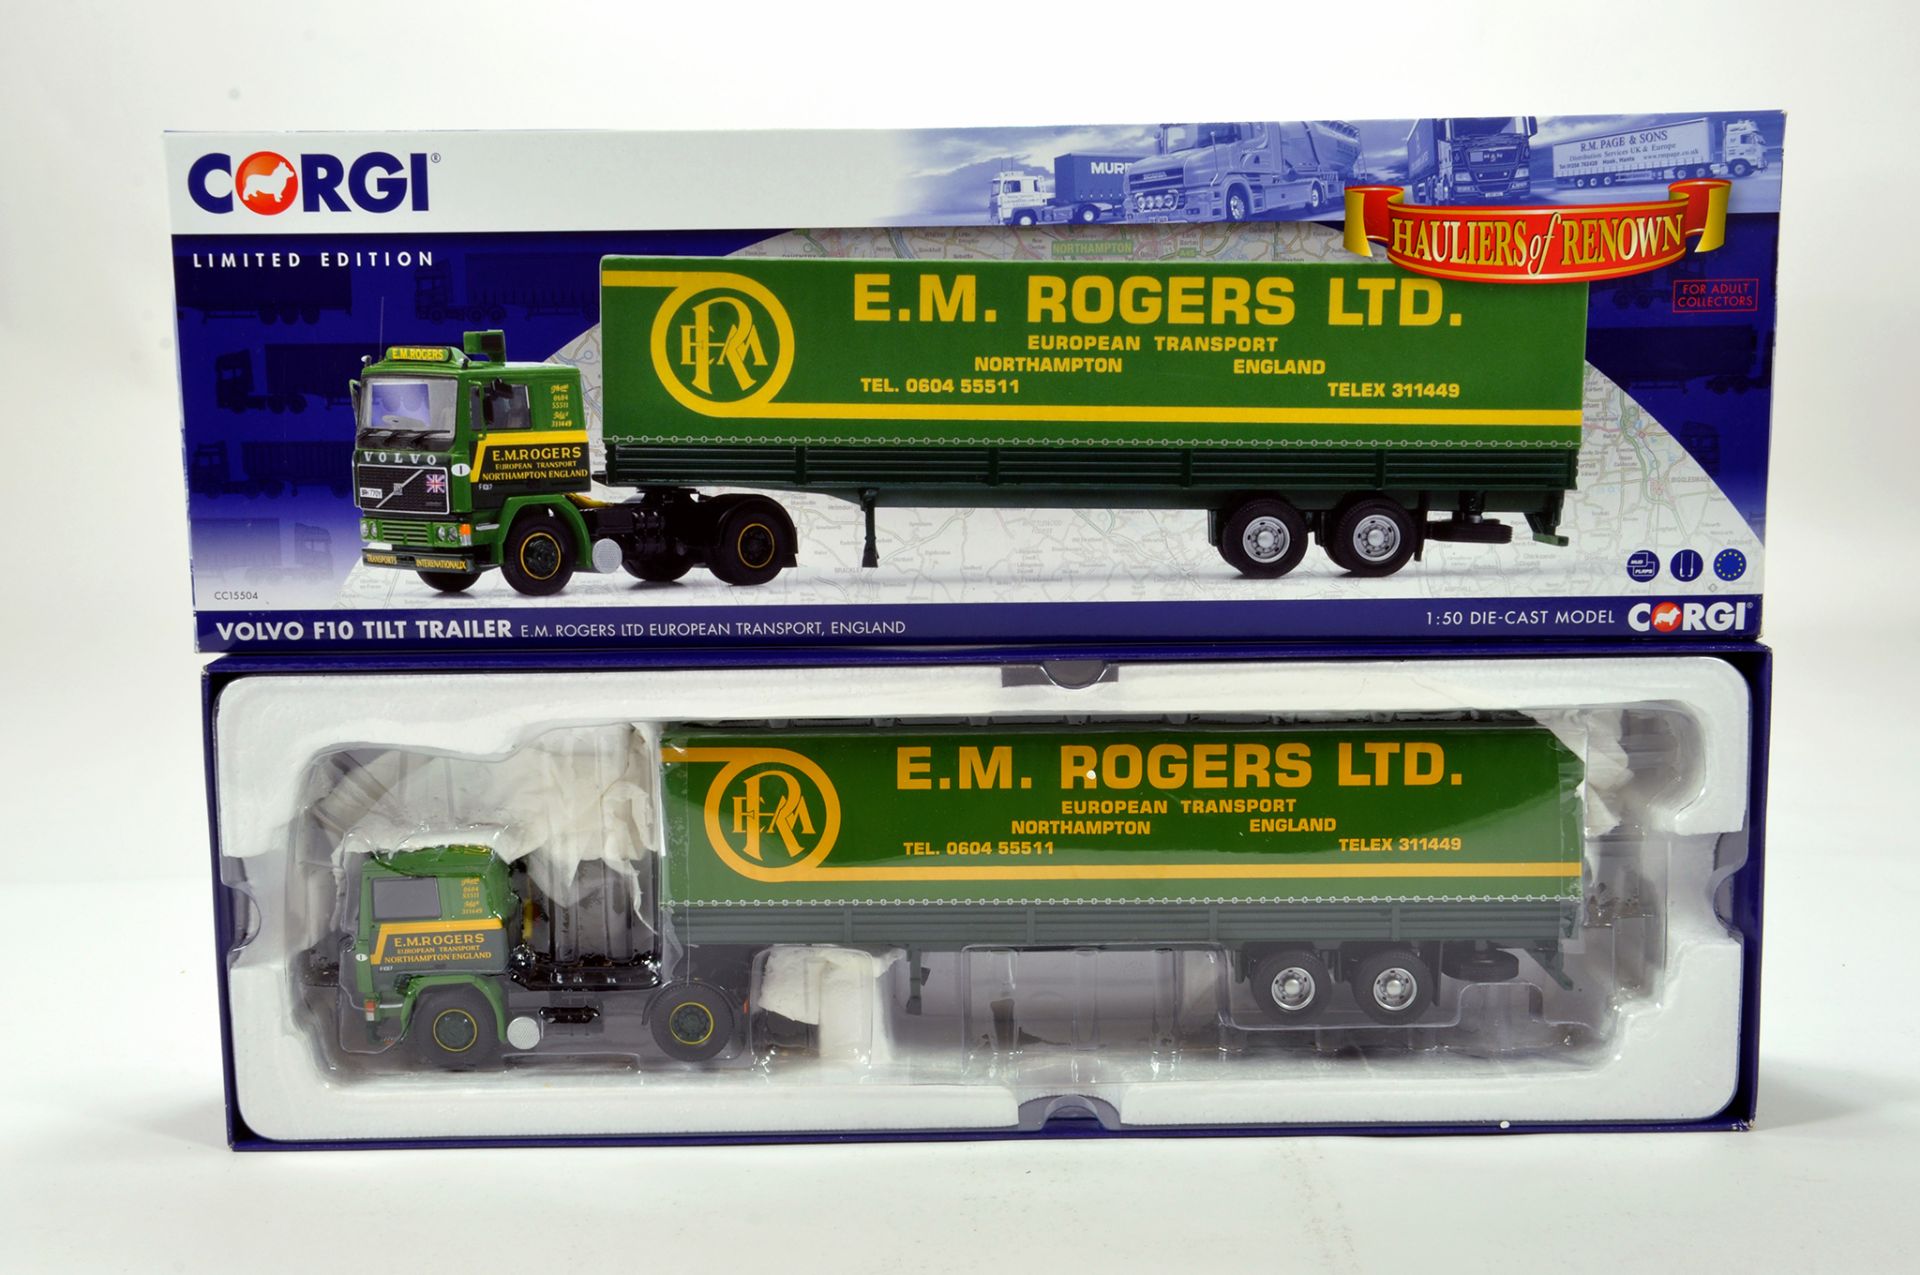 Corgi 1/50 diecast truck issue comprising No. CC15504 Volvo F10 Tilt Trailer in livery of EM Rogers.